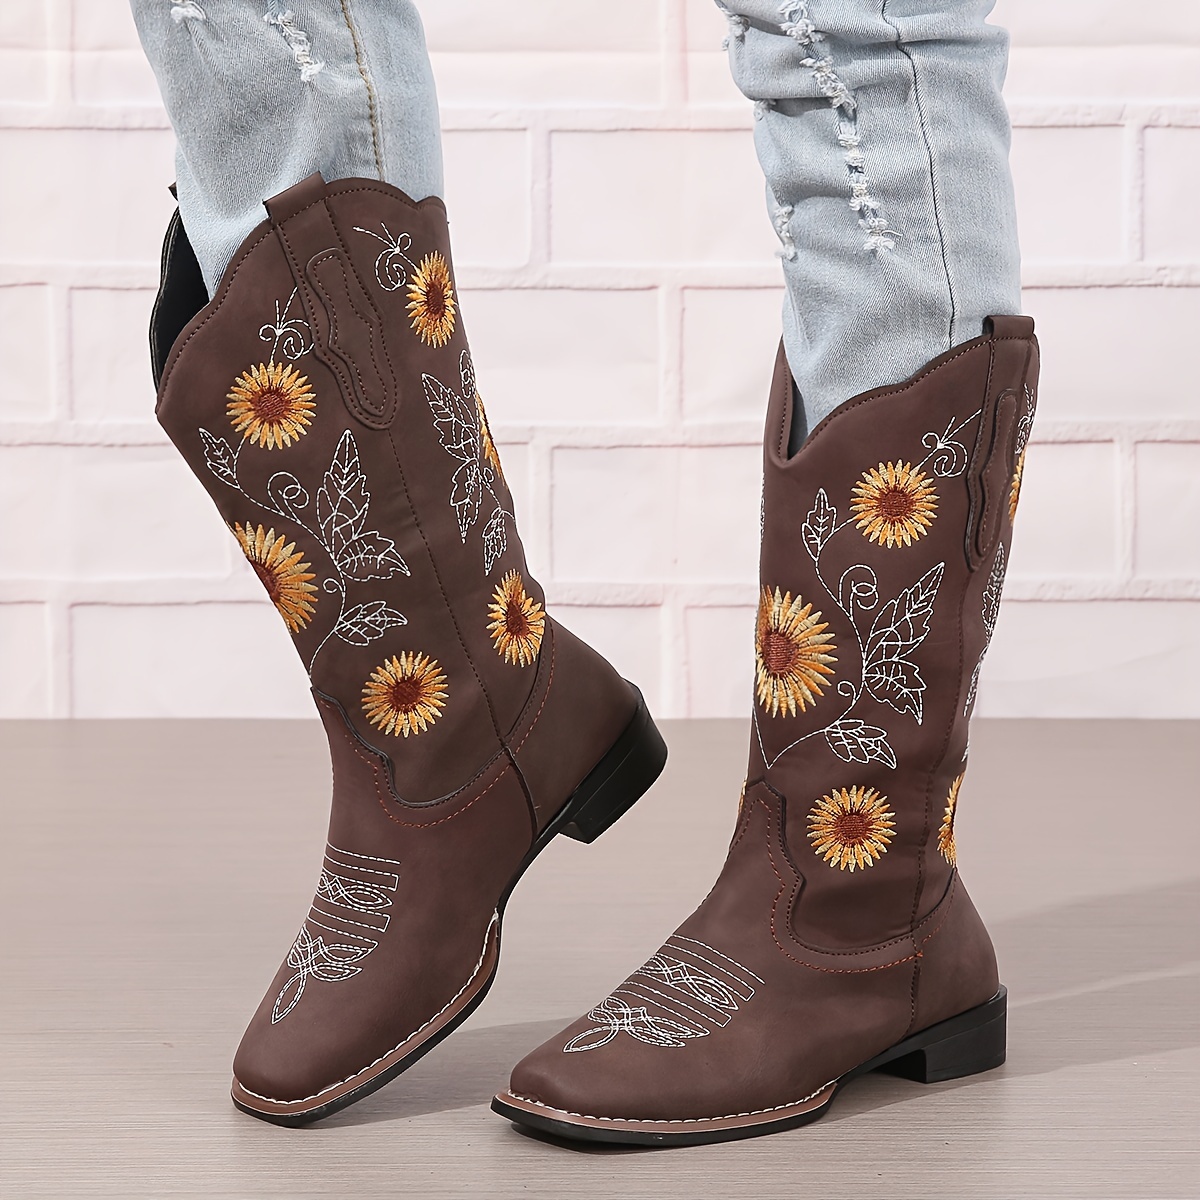 Quincy Tall Brown Cowgirl Boots Snip Toe